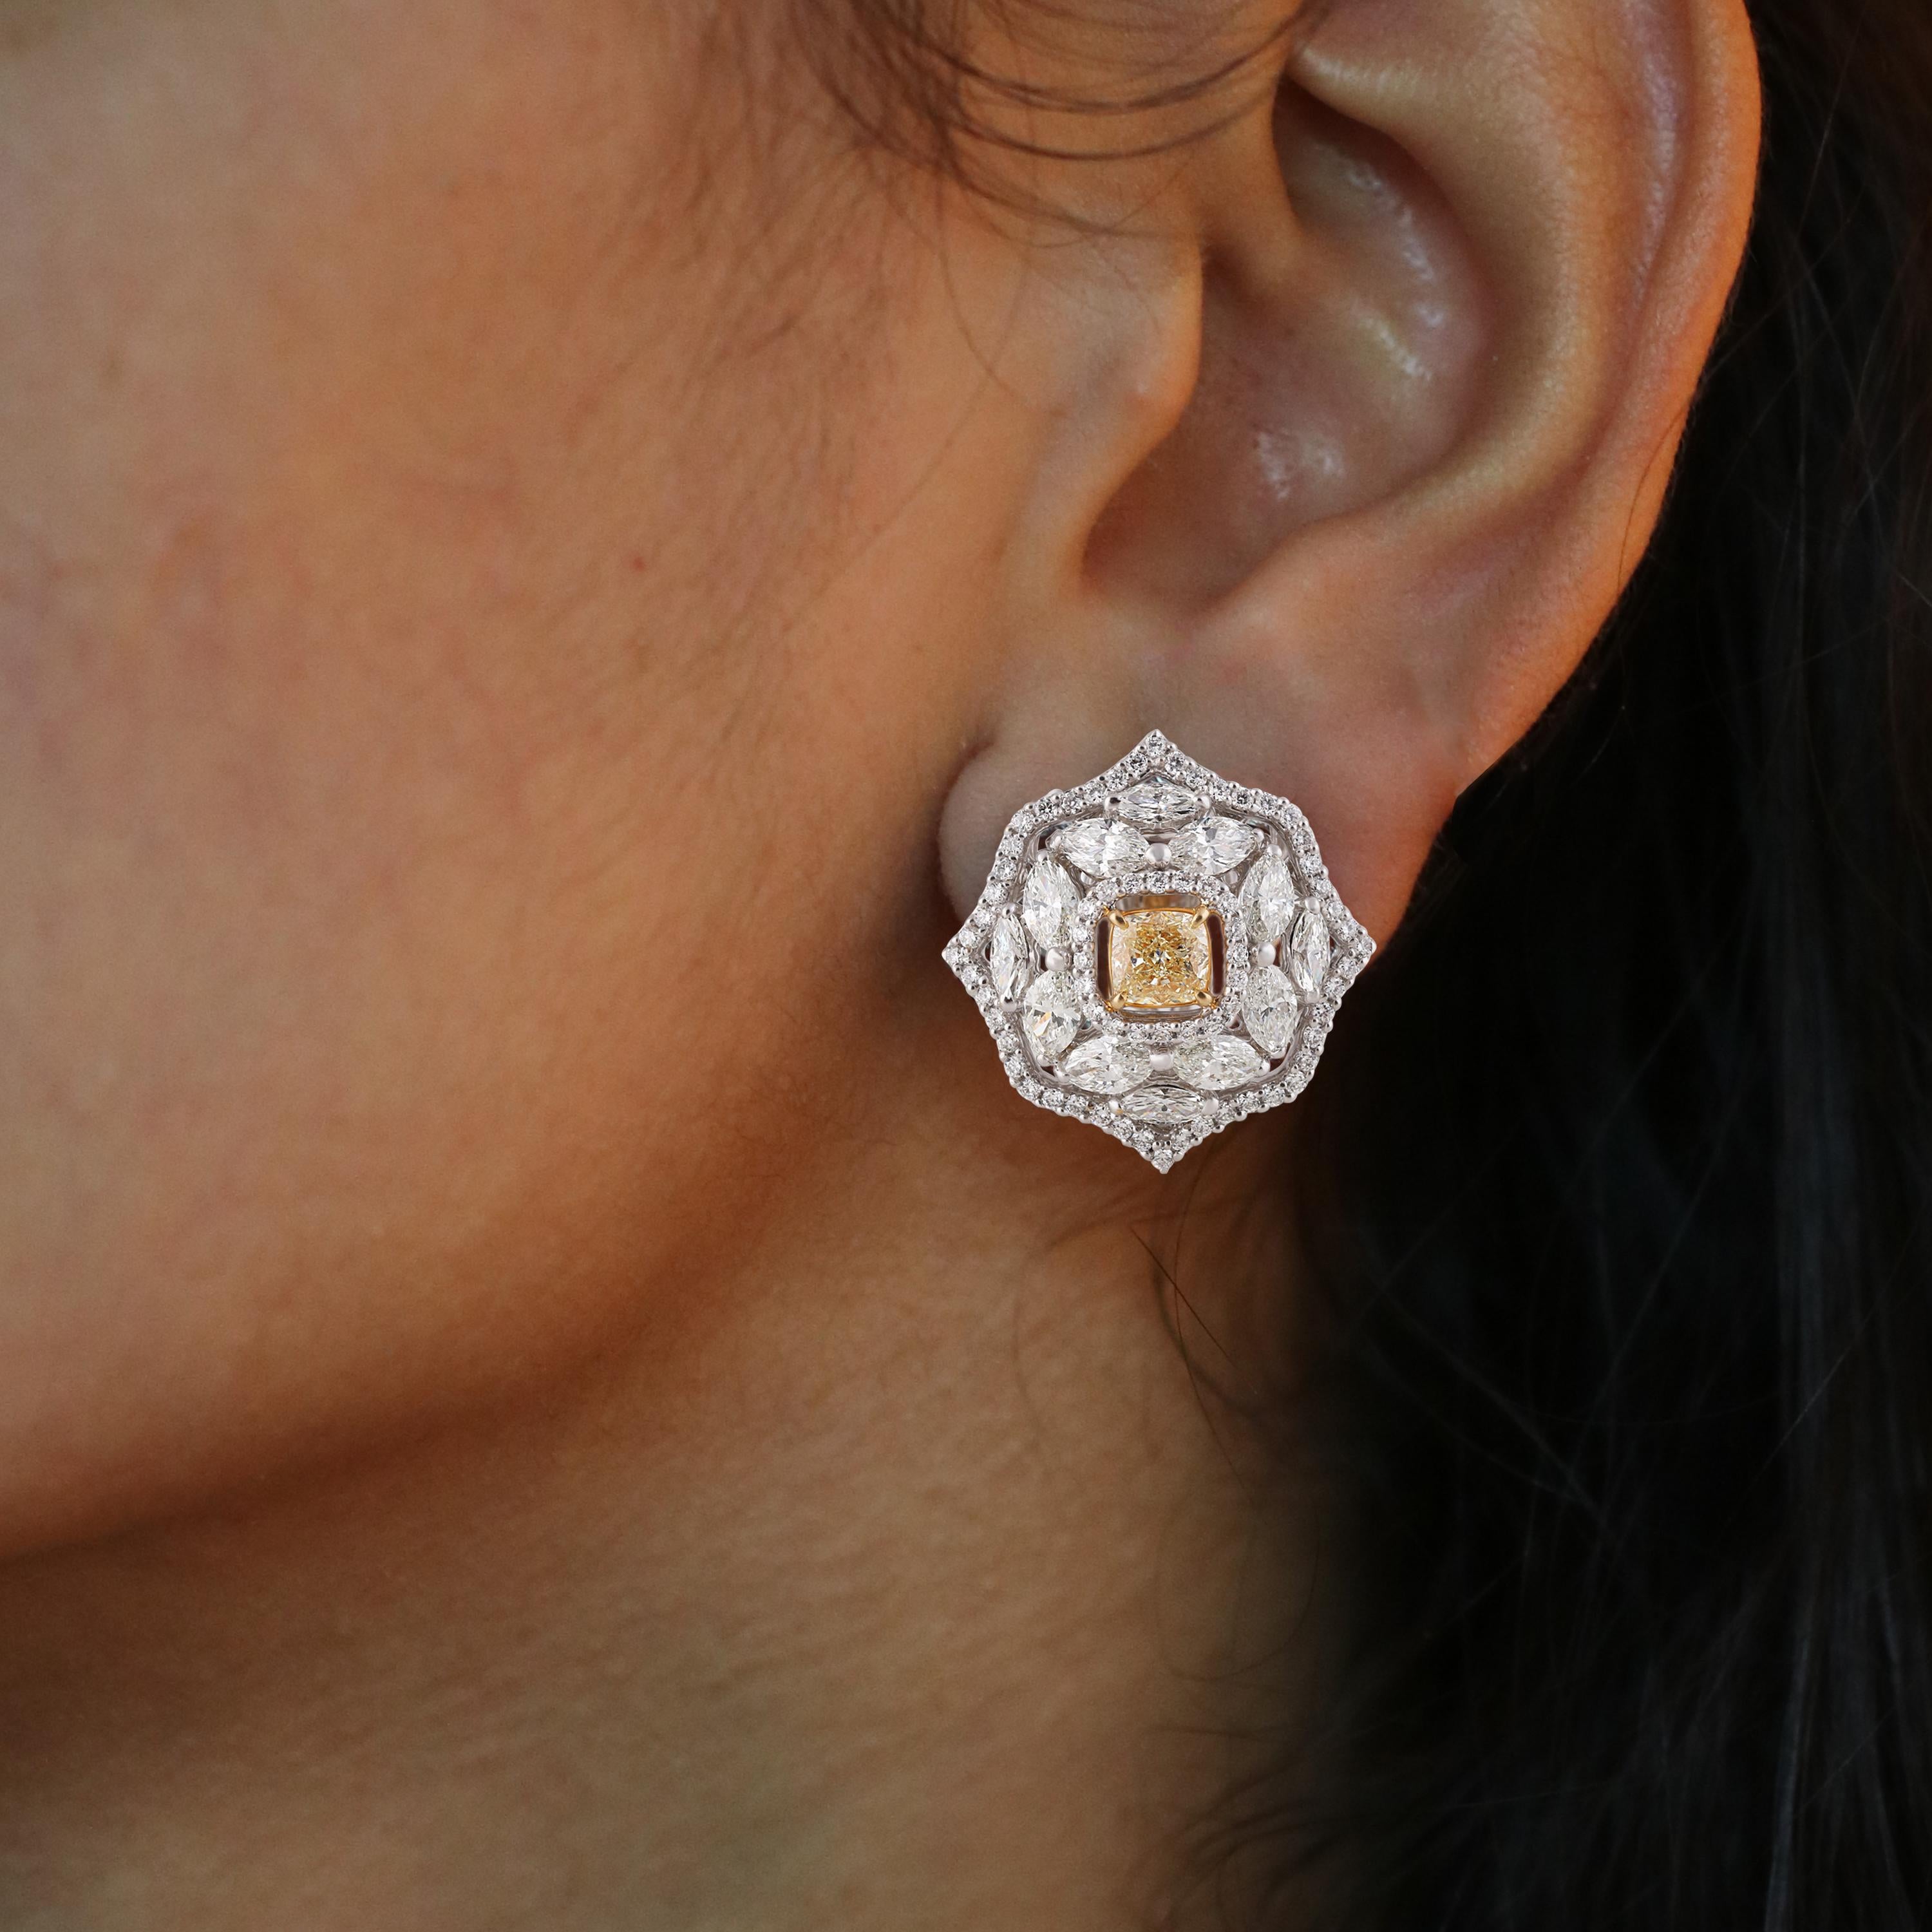 Gross Weight: 16.07 Grams
Diamond Weight: 4.67 cts
IGI Certification can be done on request

Video of the product can be shared upon request.

These stud earrings, shaped like the 8 pointed star made famous by Mughal designers, embody the geometry